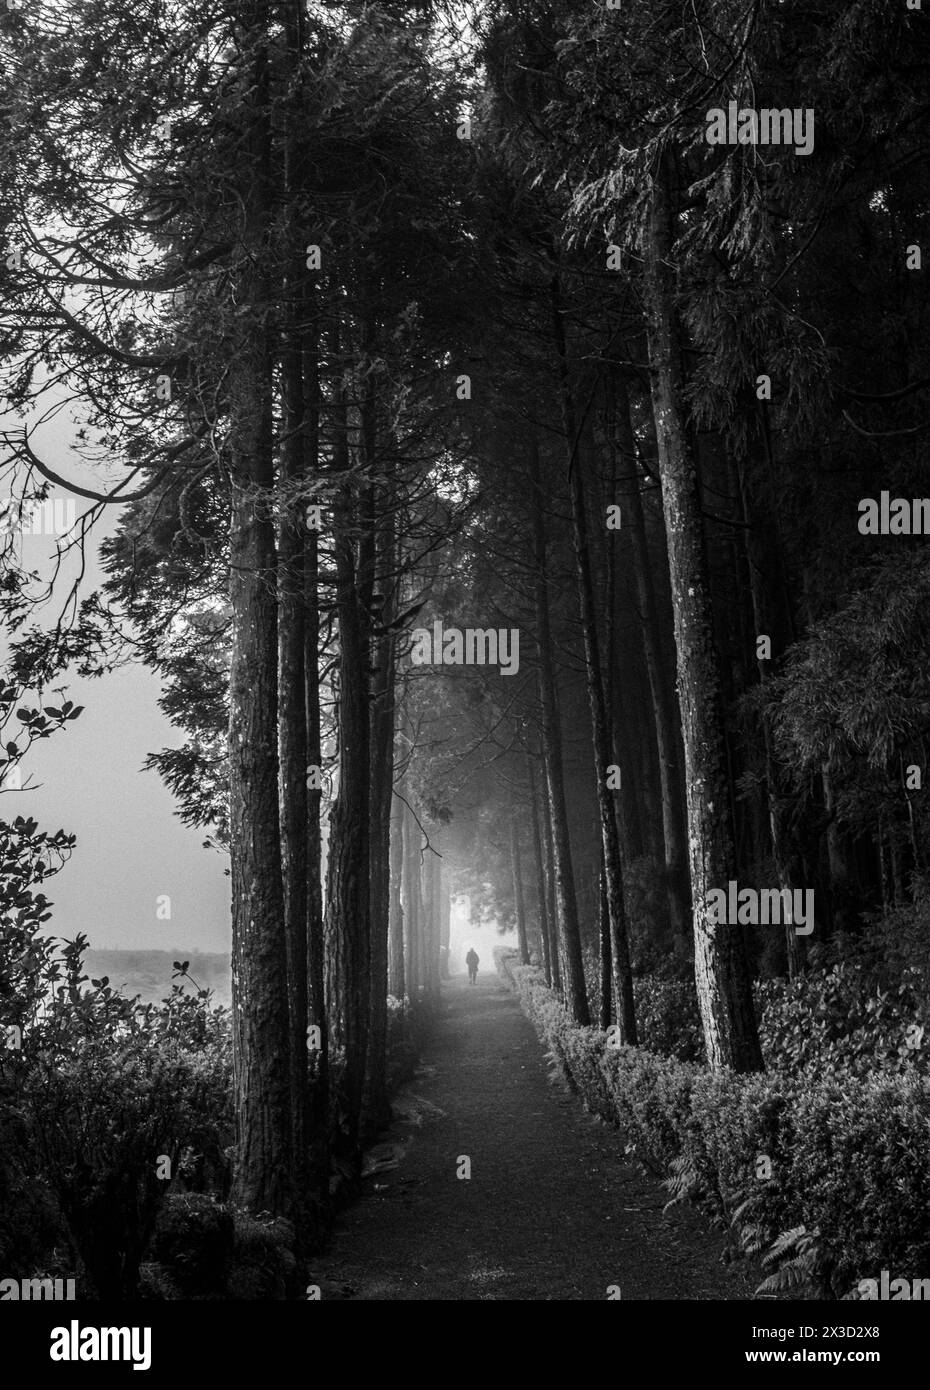 One lone person walks along foggy tree lined trail, Azores Islands Stock Photo